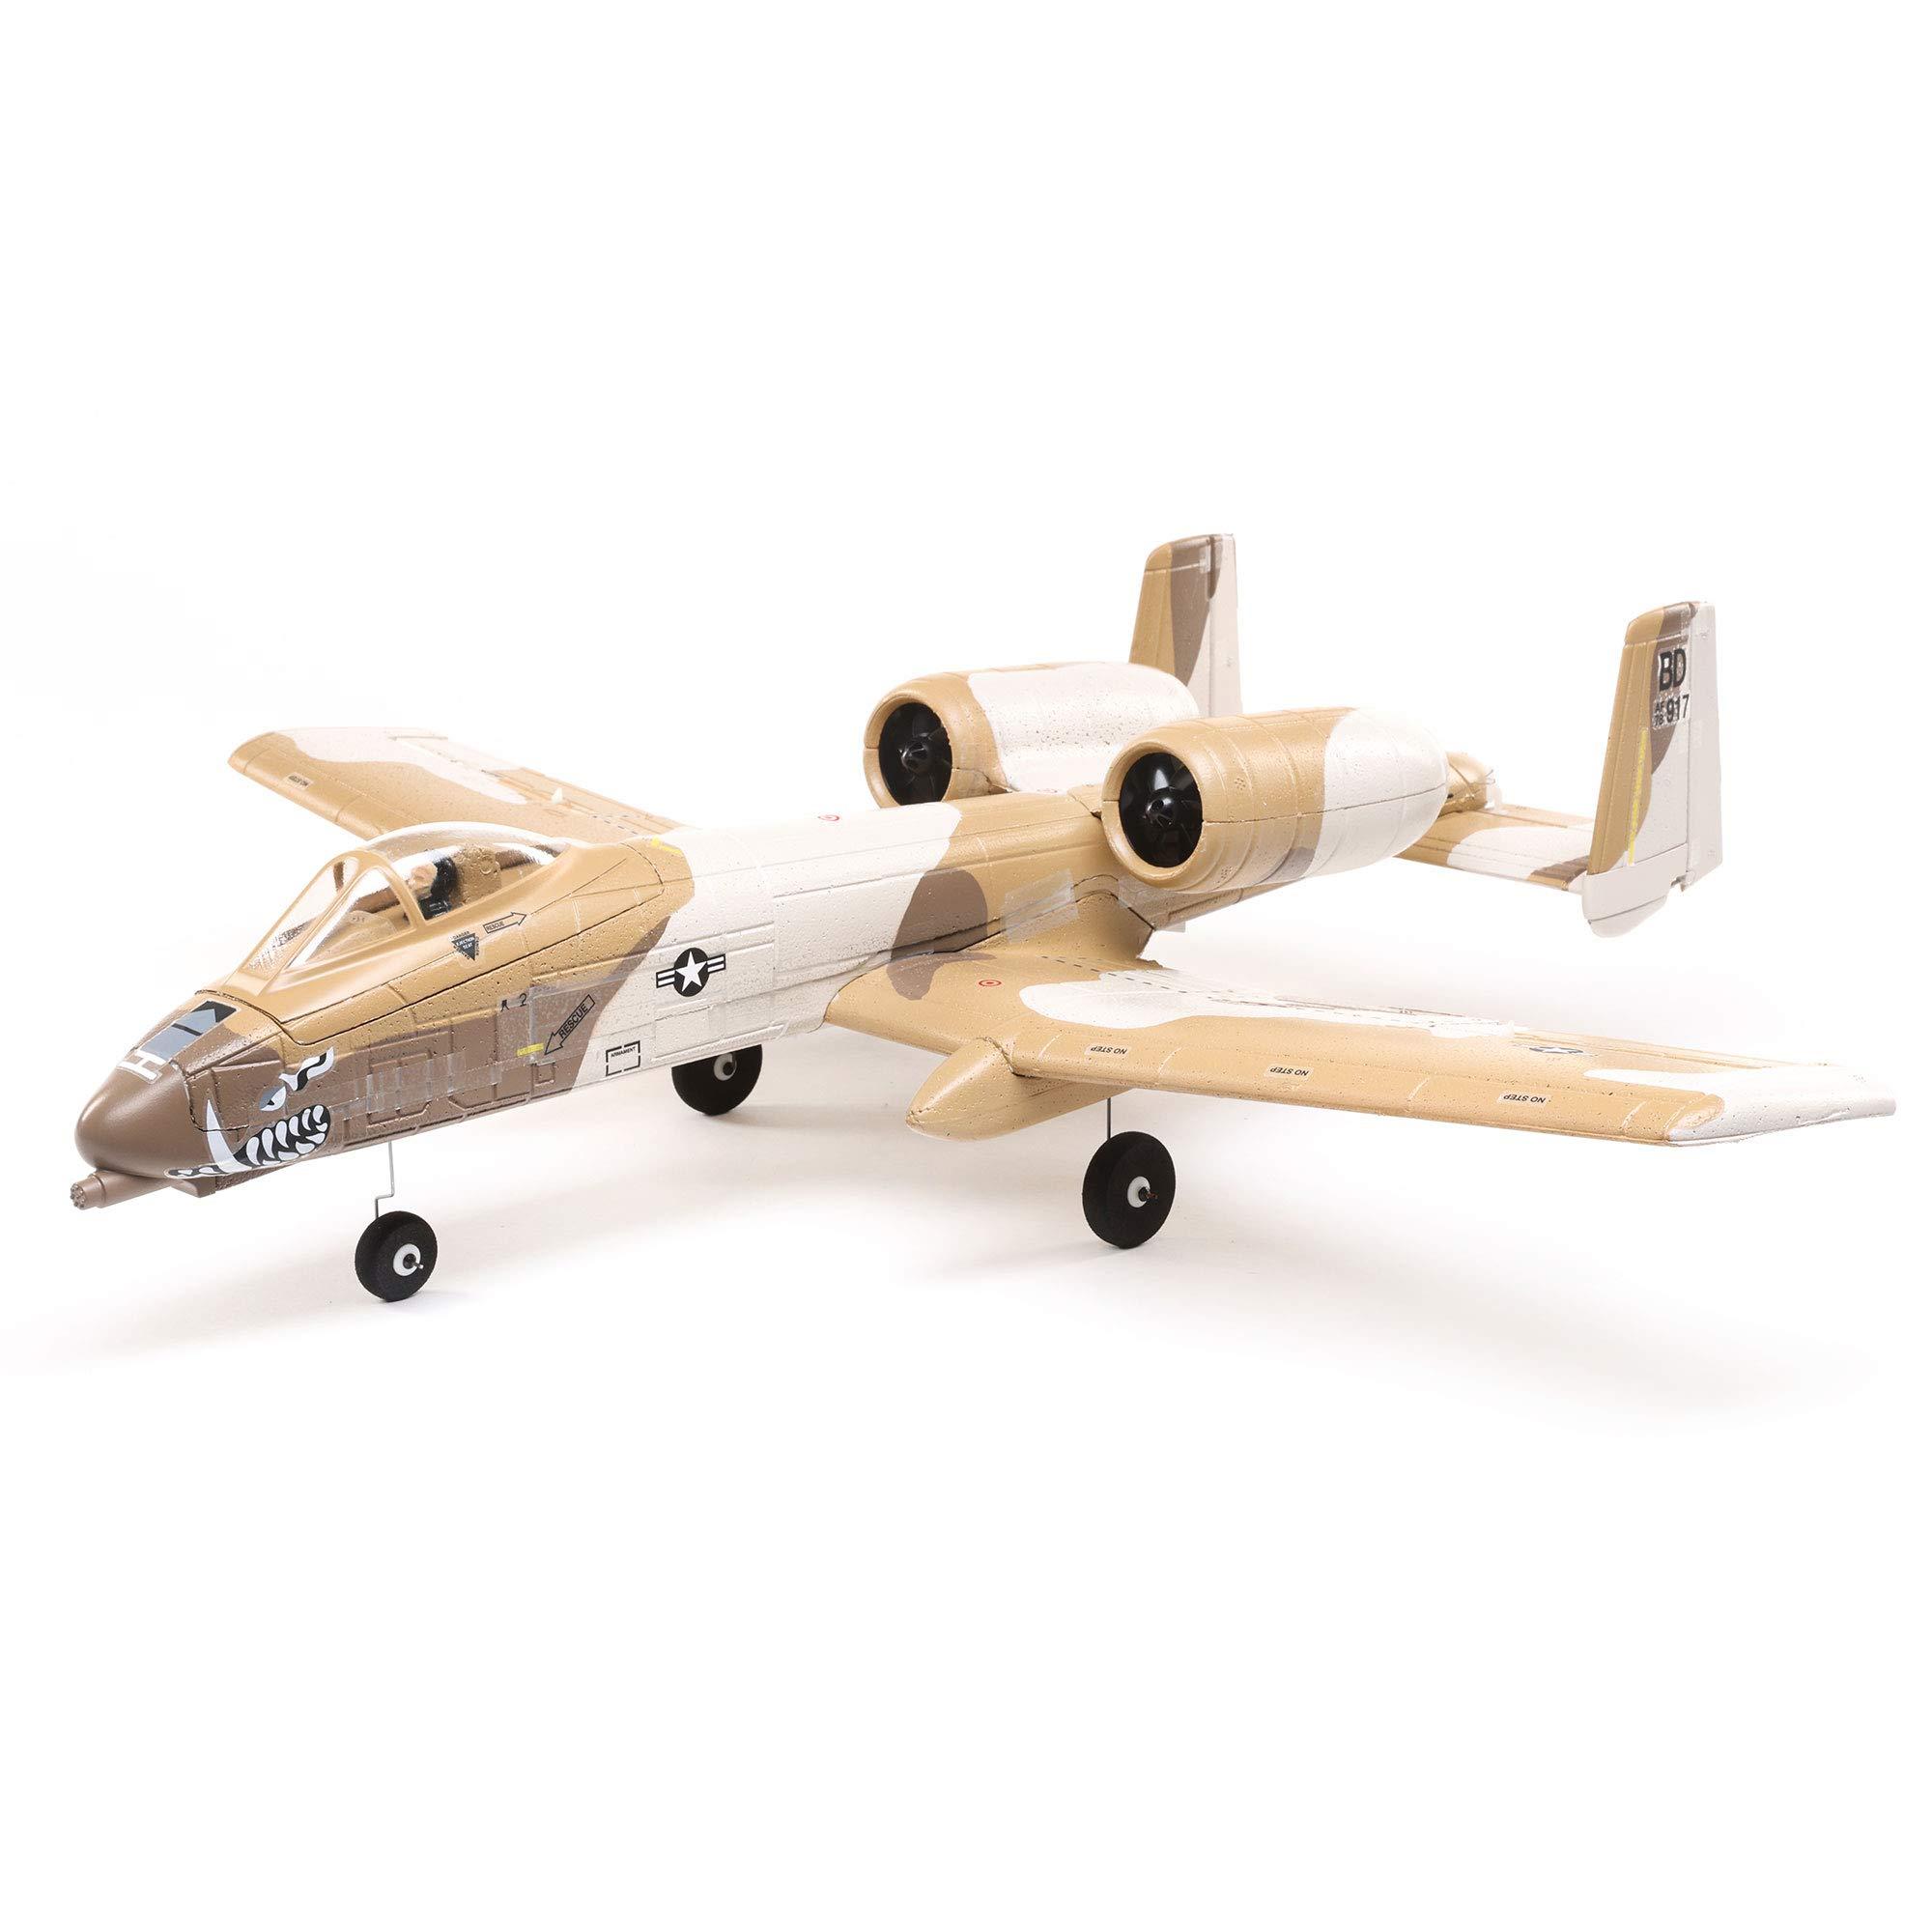 A 10 Warthog Rc Plane: Where to Find the A-10 Warthog RC Plane: Online Retailers and Marketplaces